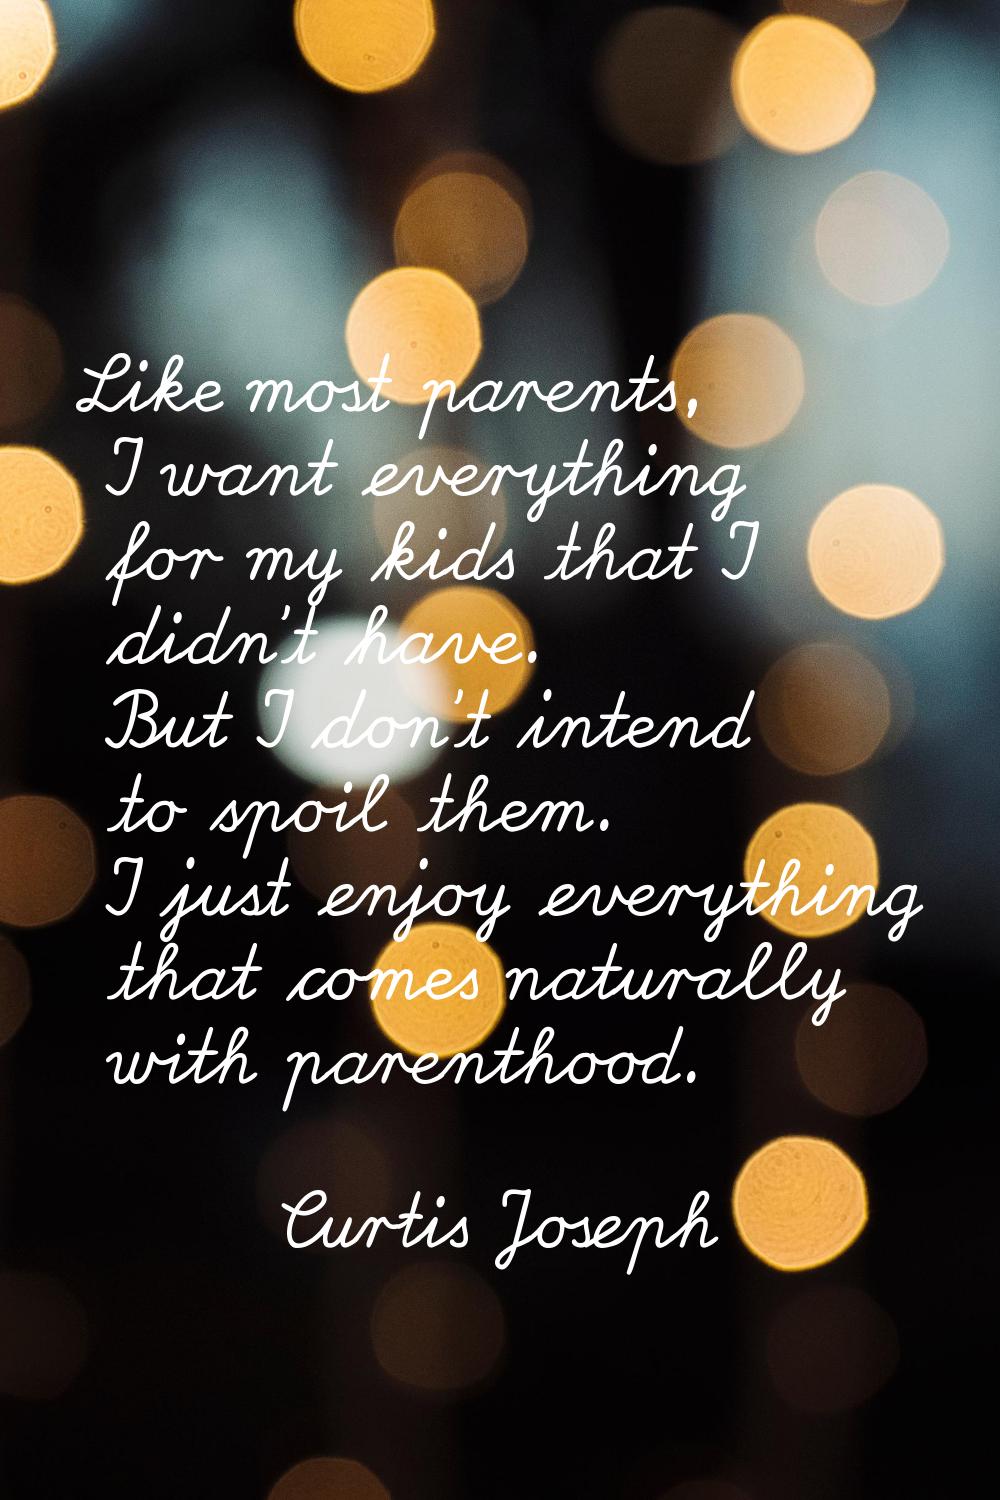 Like most parents, I want everything for my kids that I didn't have. But I don't intend to spoil th